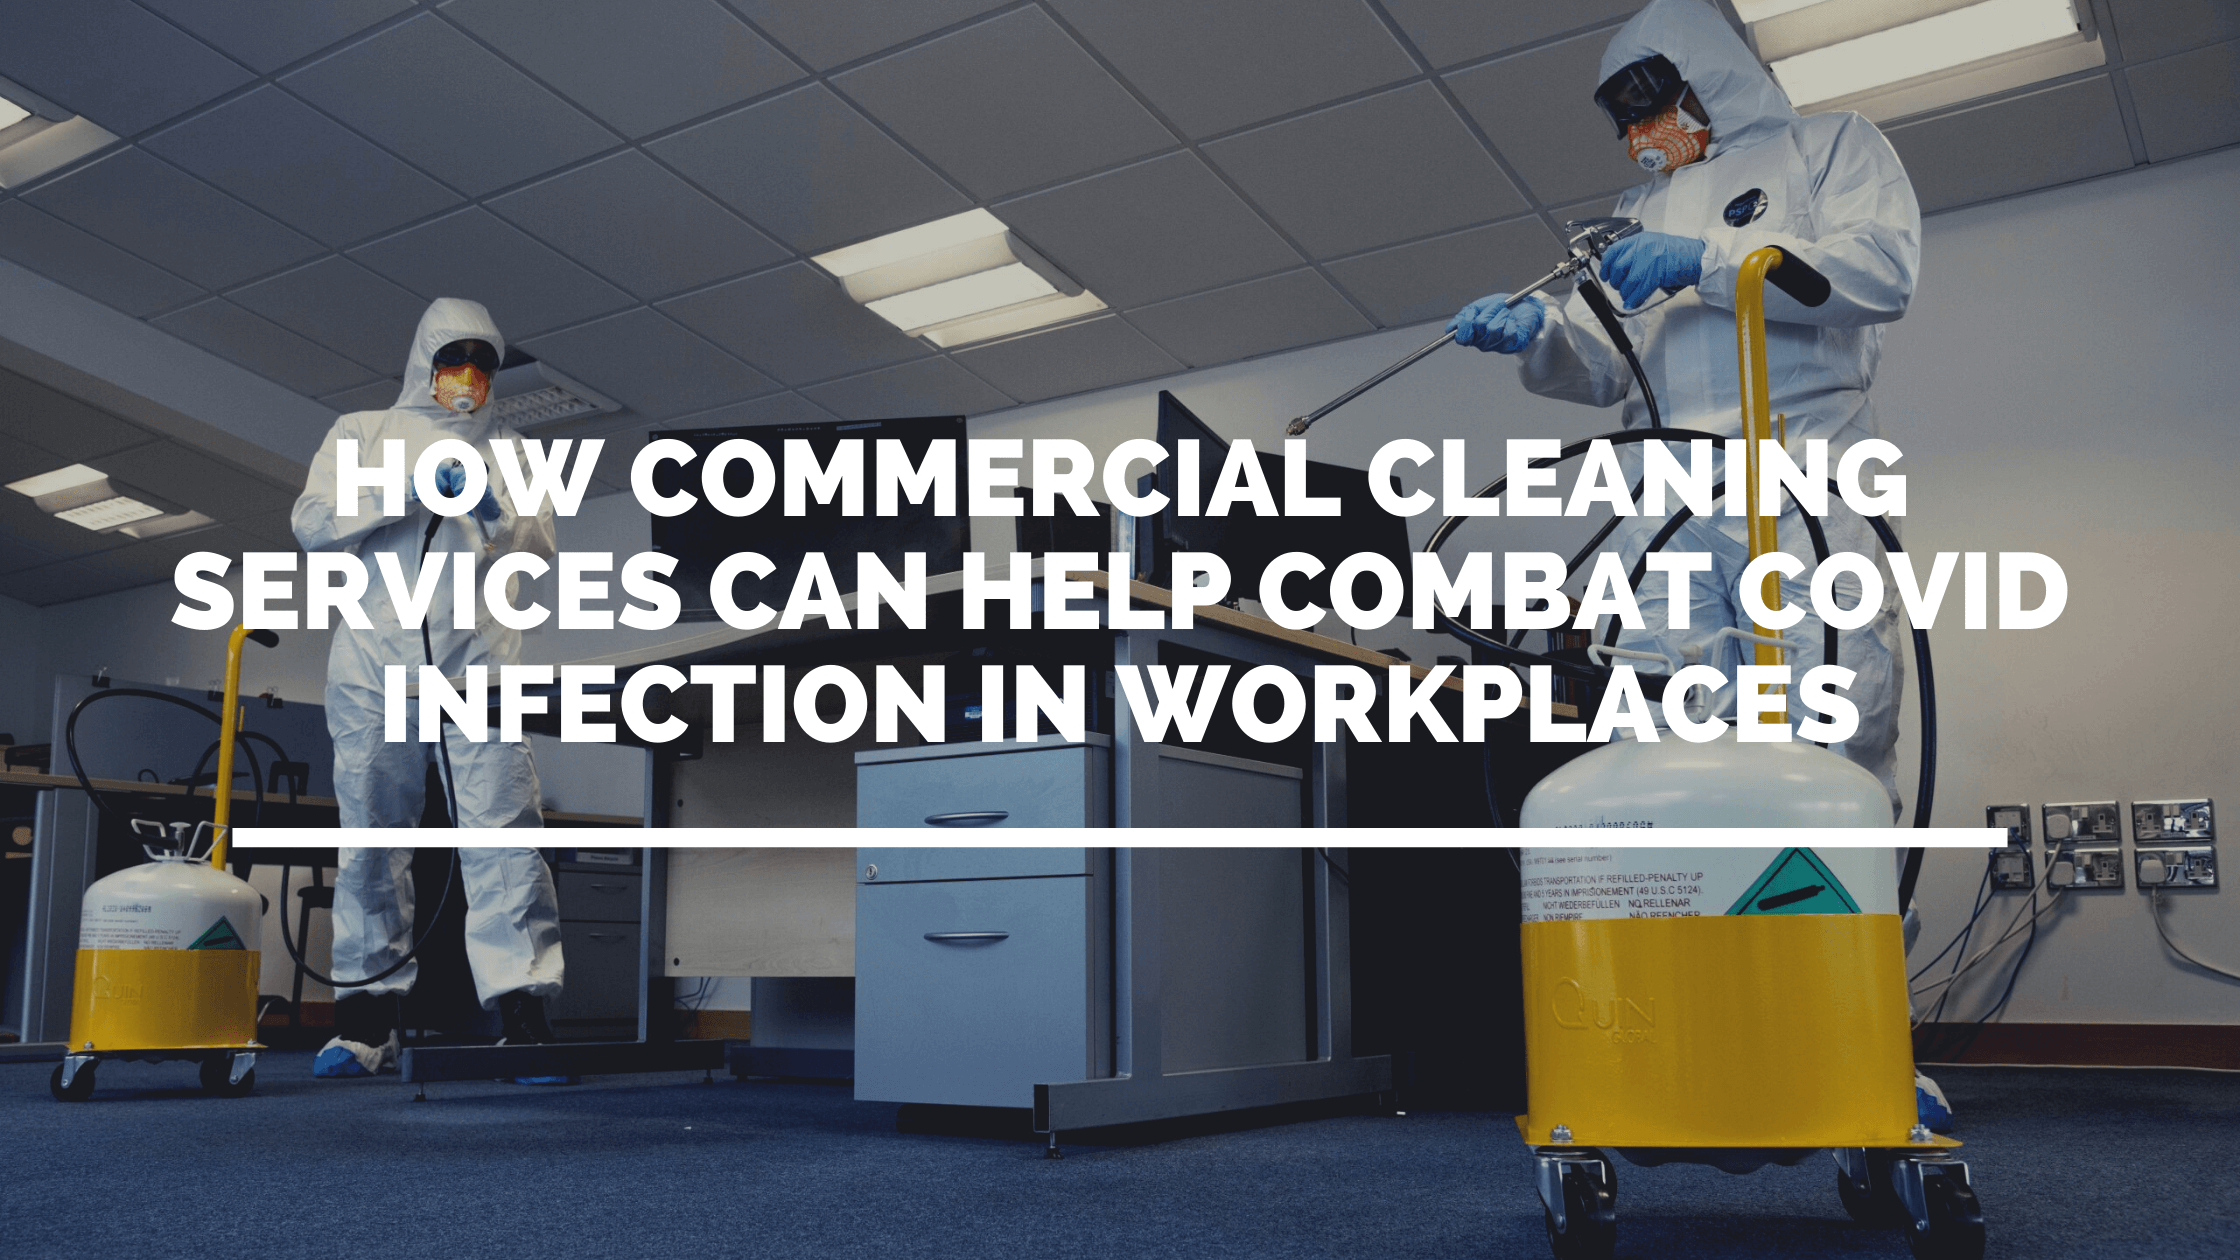 How Commercial Cleaning Services can Help Combat COVID Infection in Workplaces - BSM Inc